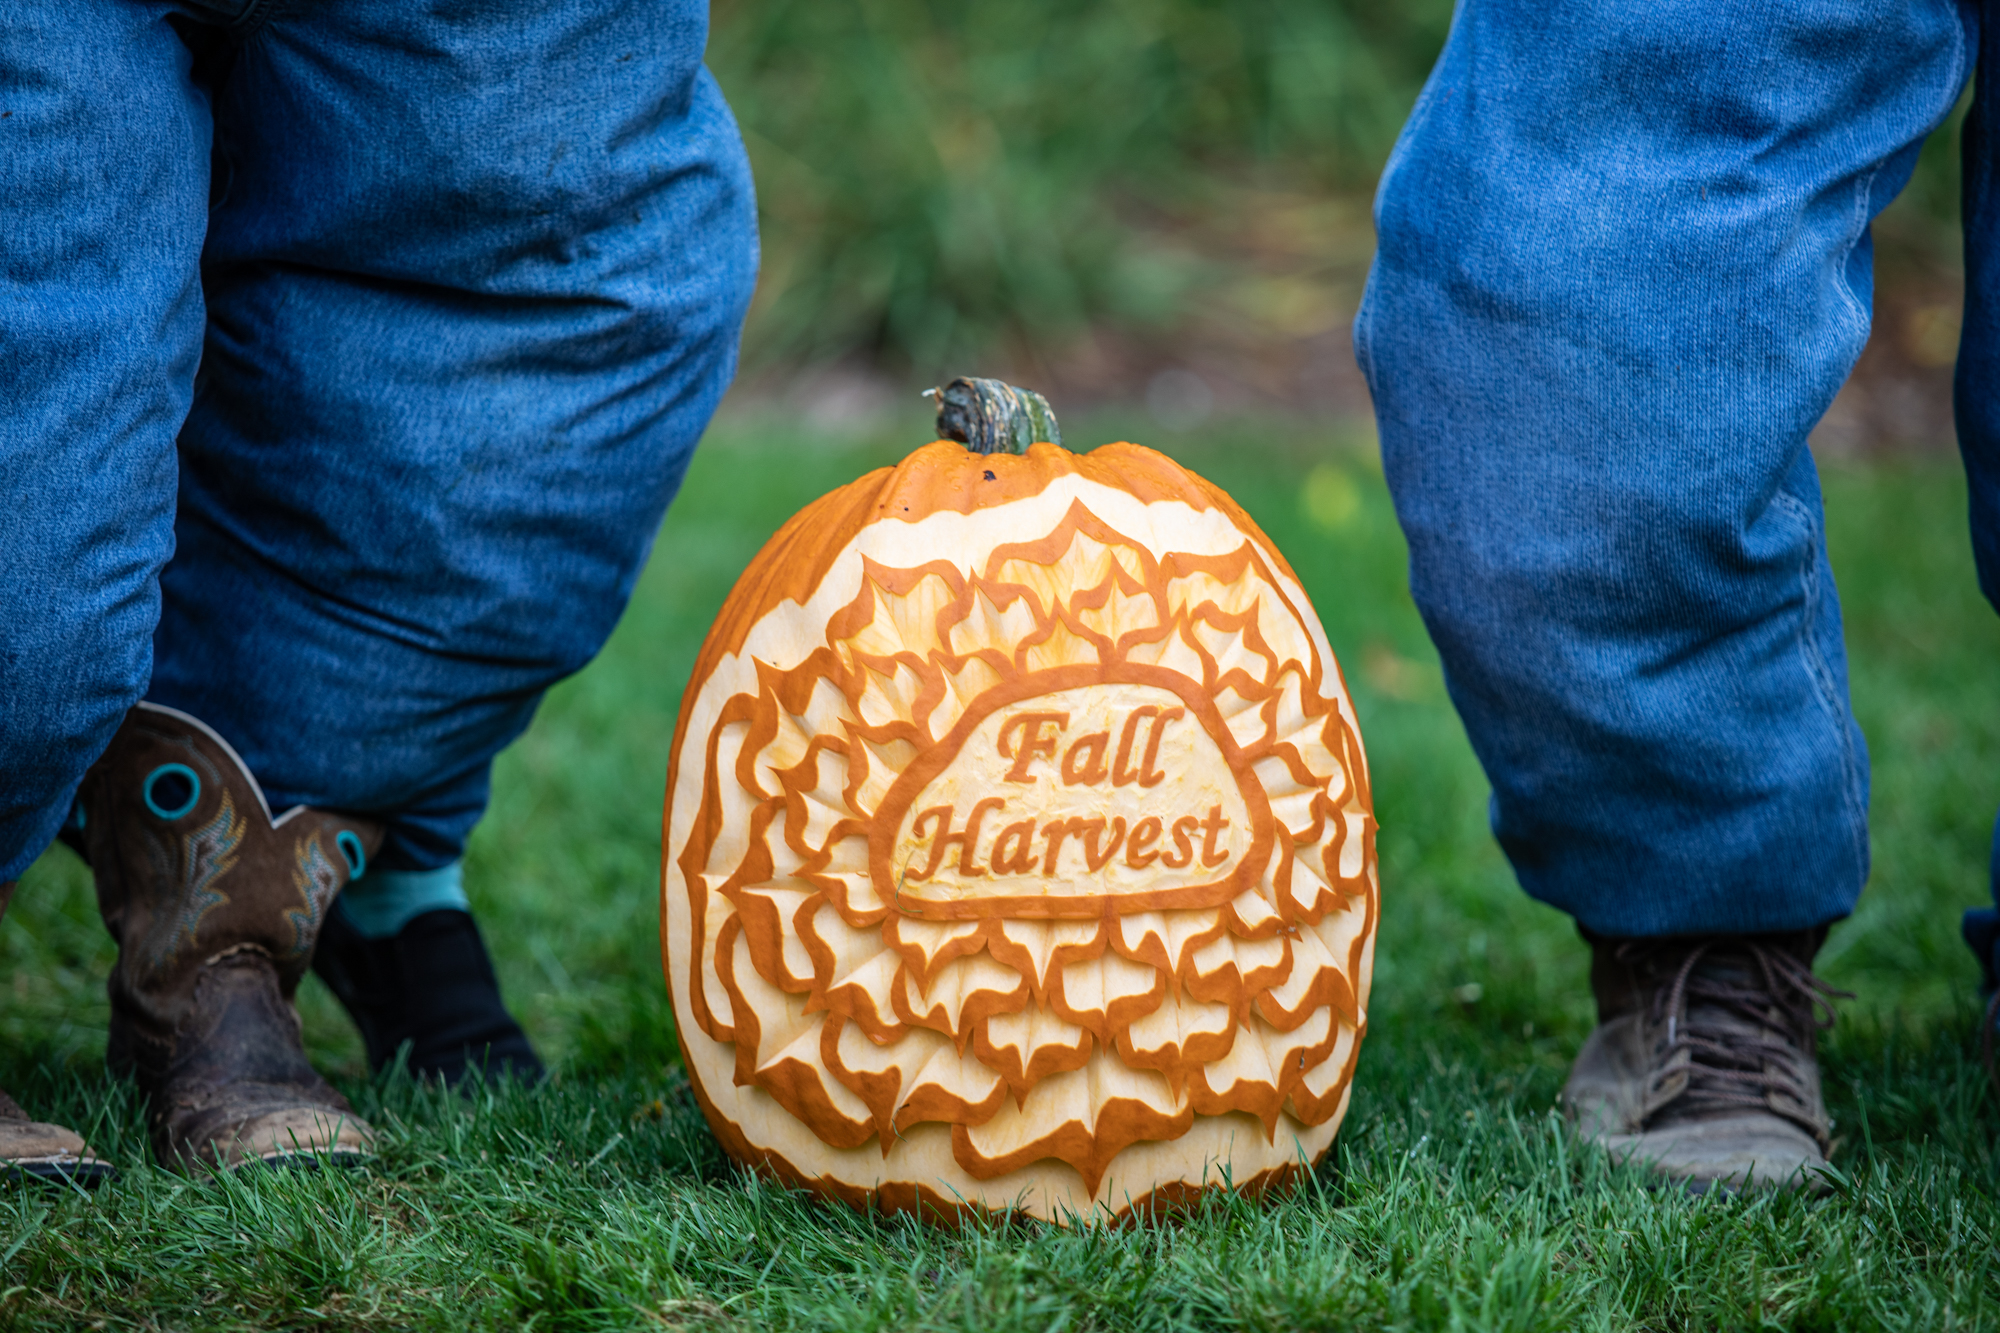 A pumpkin decoratively carved to say 